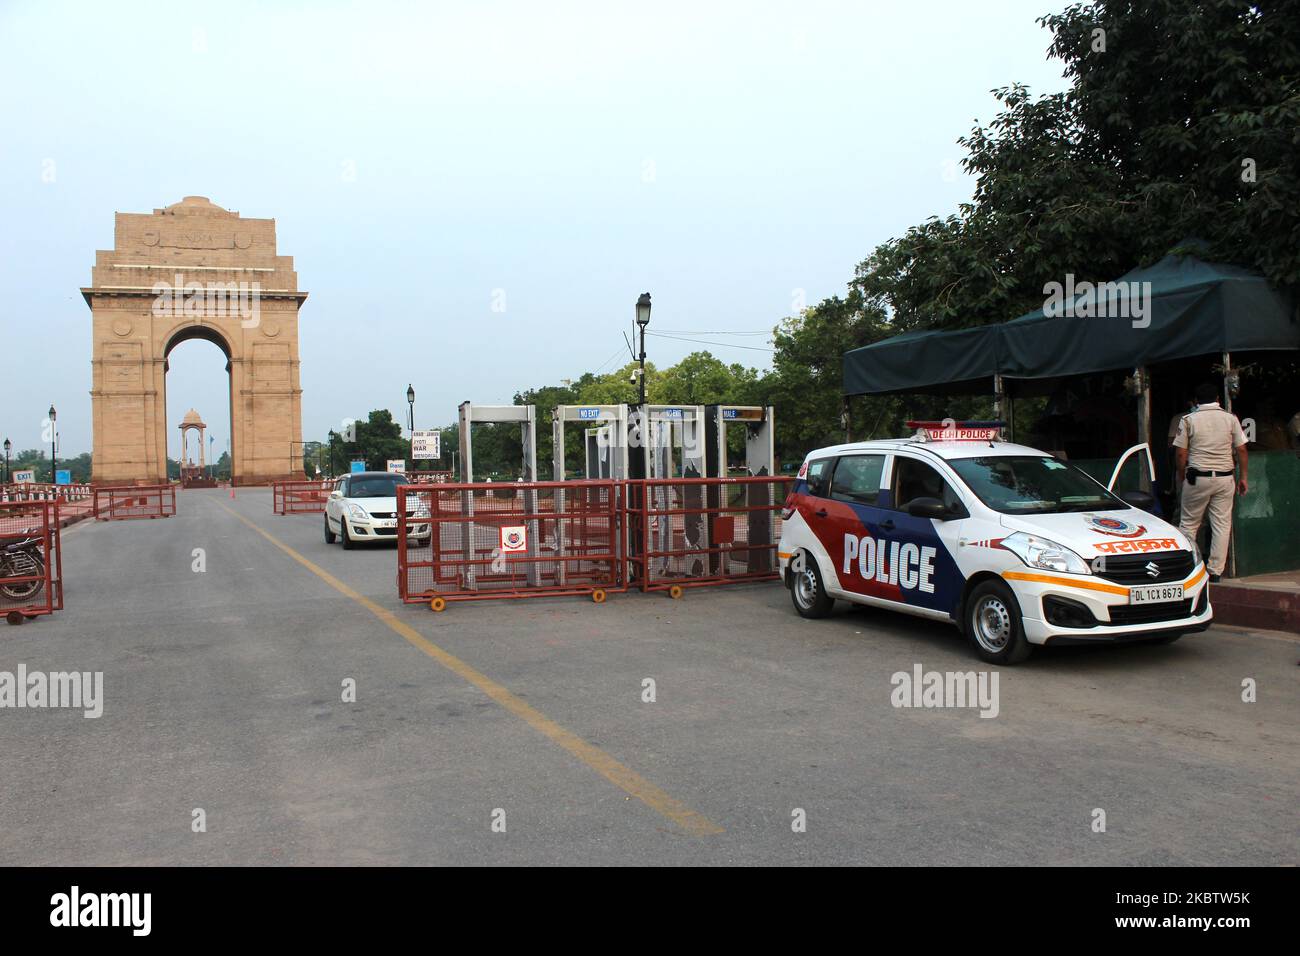 A deserted view of India Gate on July 18, 2020 in New Delhi as it remains closed to curb the spread of coronavirus in the national capital. Amid the threat of coronavirus spread, the India Gate and the War Memorial has been closed for the visitors till further notice. The shut down comes in a bid to curb mass gathering and public exposure to avoid the transmission of COVID-19 virus. (Photo by Mayank Makhija/NurPhoto) Stock Photo